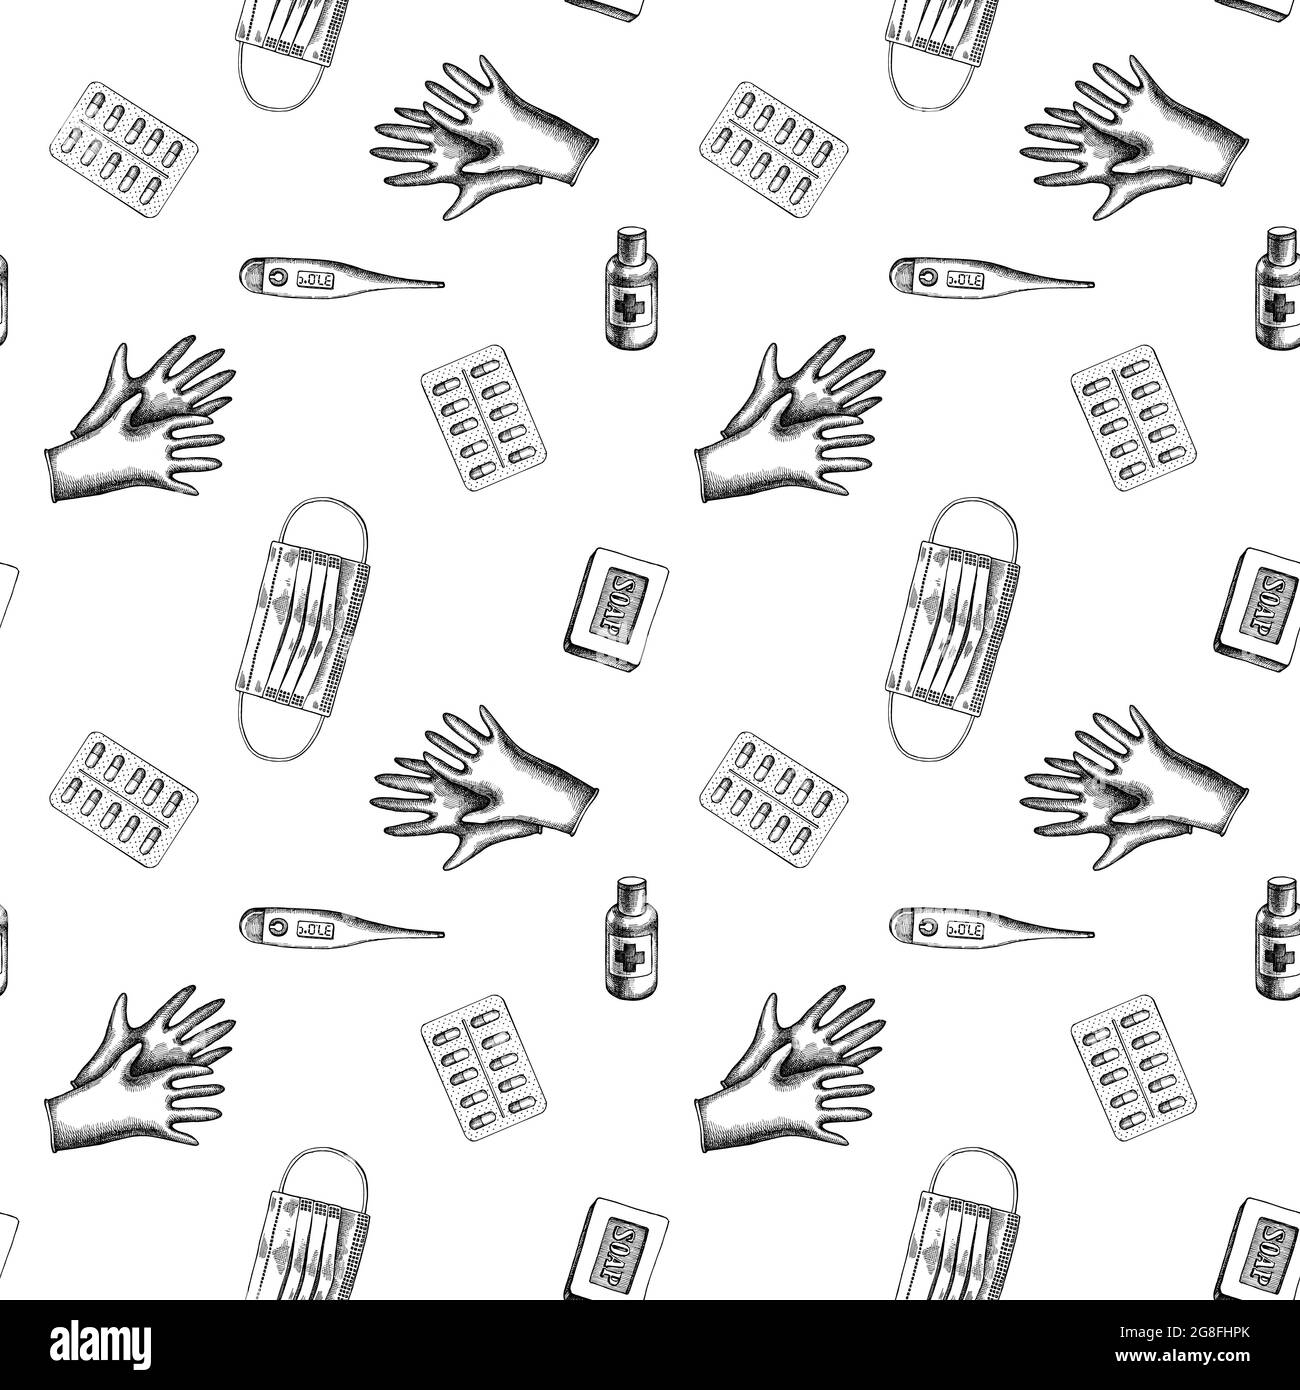 Seamless pattern with black and white pills and medicines, medical face mask, sanitizer bottles, medical thermometer, soap, medical gloves Stock Vector